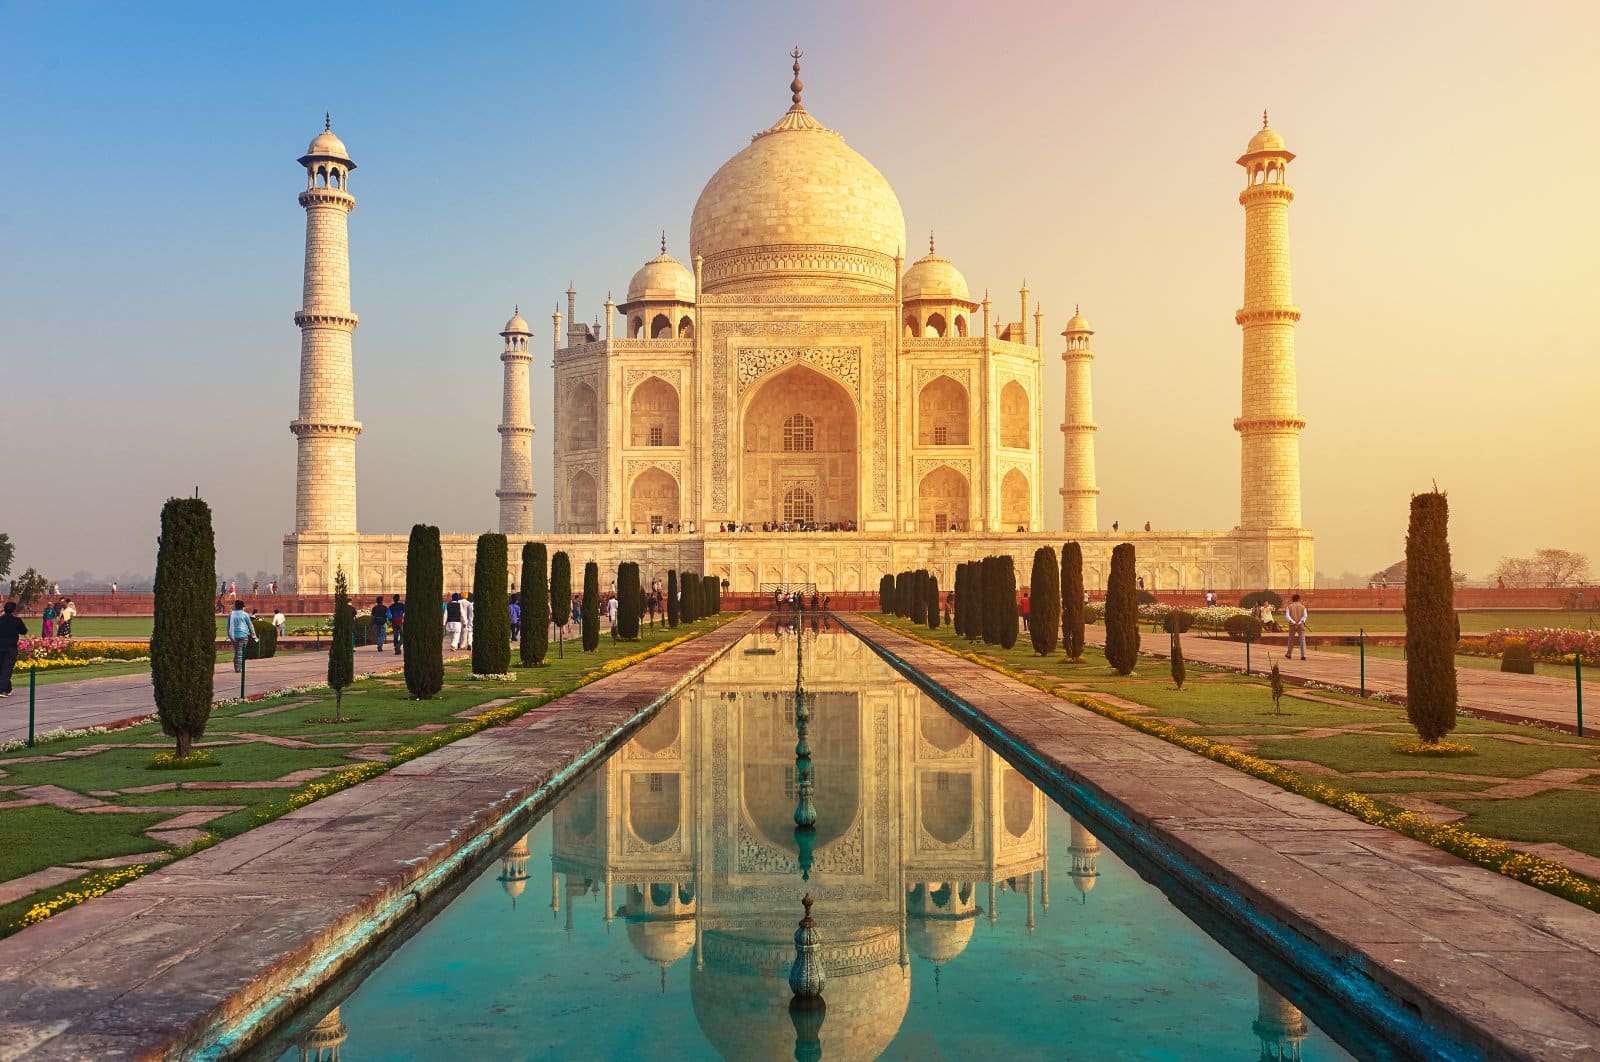 <p class="wp-caption-text">Image Credit: Shutterstock / YURY TARANIK</p>  <p><span>The Taj Mahal, is one of the Seven Wonders of the World, offers a breathtaking sight not to be missed — the sunrise view. Witnessing the first rays of the sun illuminate the white marble mausoleum is a magical experience. The early morning light bathes the Taj Mahal in a soft, golden hue, highlighting its intricate craftsmanship and majestic beauty. This time of day is perfect for photography and allows for a more serene experience, away from the crowds that gather as the day progresses.</span></p>